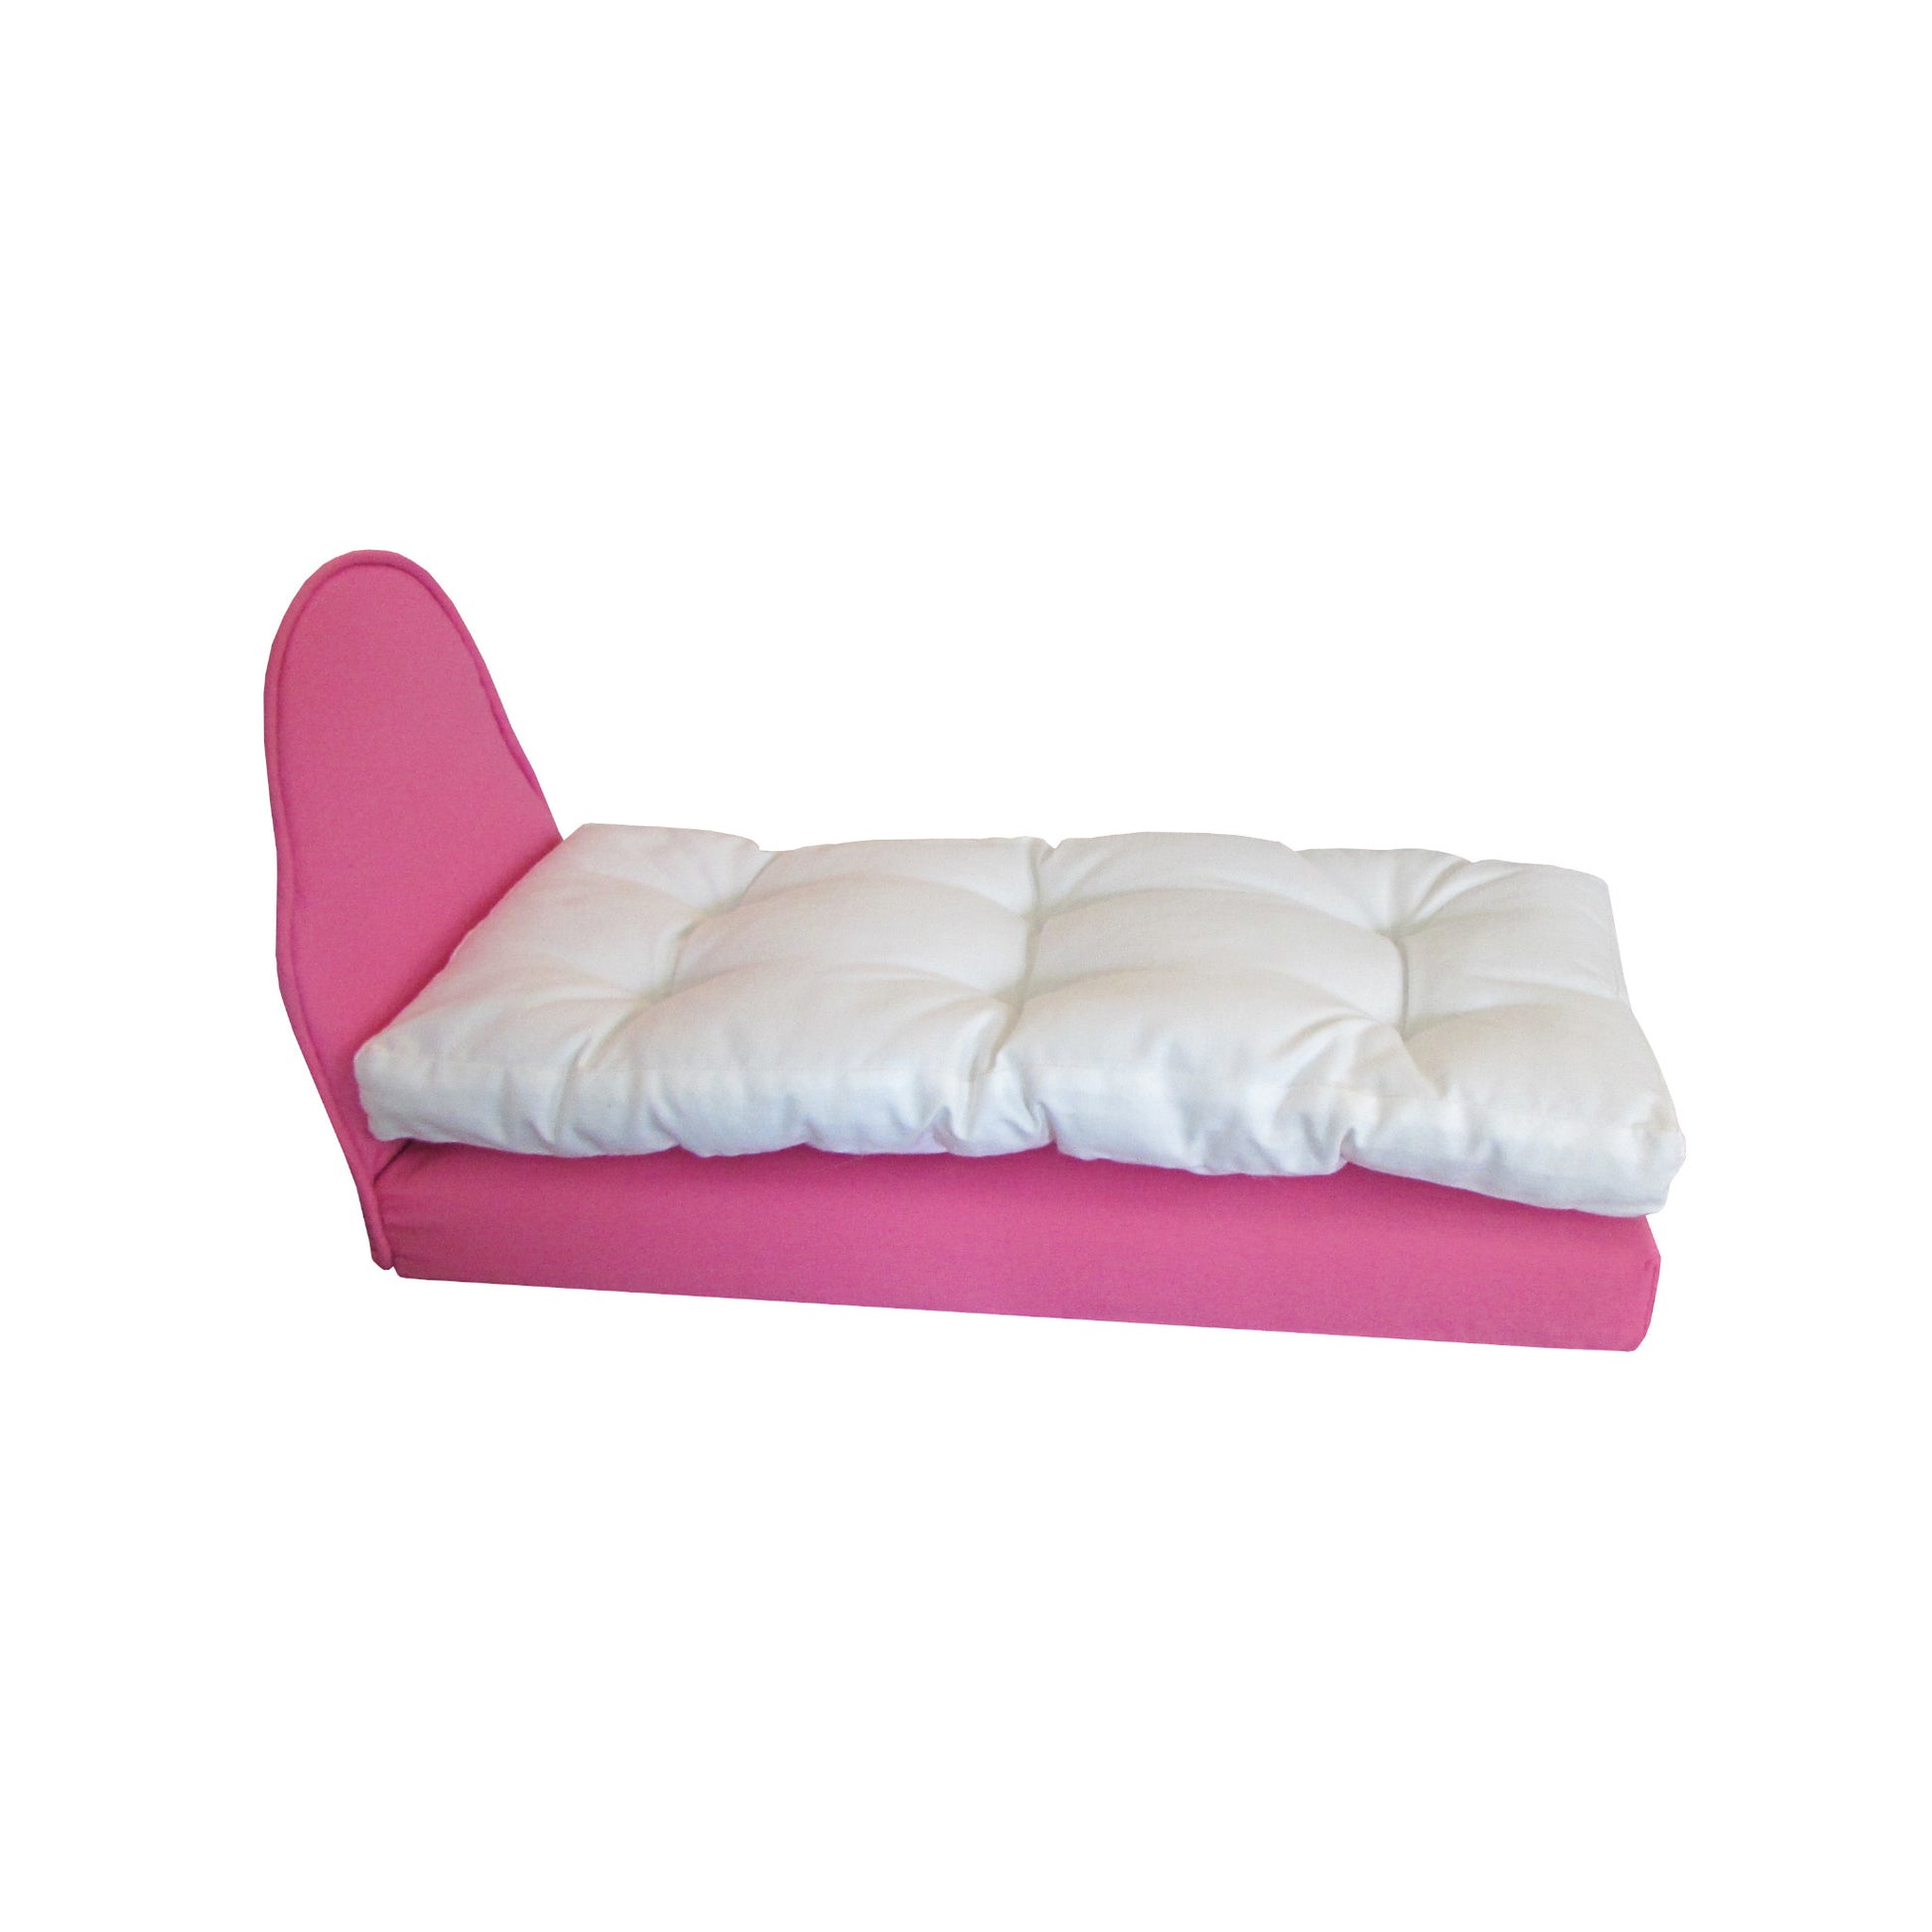 Bright Pink Doll Bed and Mattress for Love Doll Bedding for 11.5-inch and 12-inch dolls